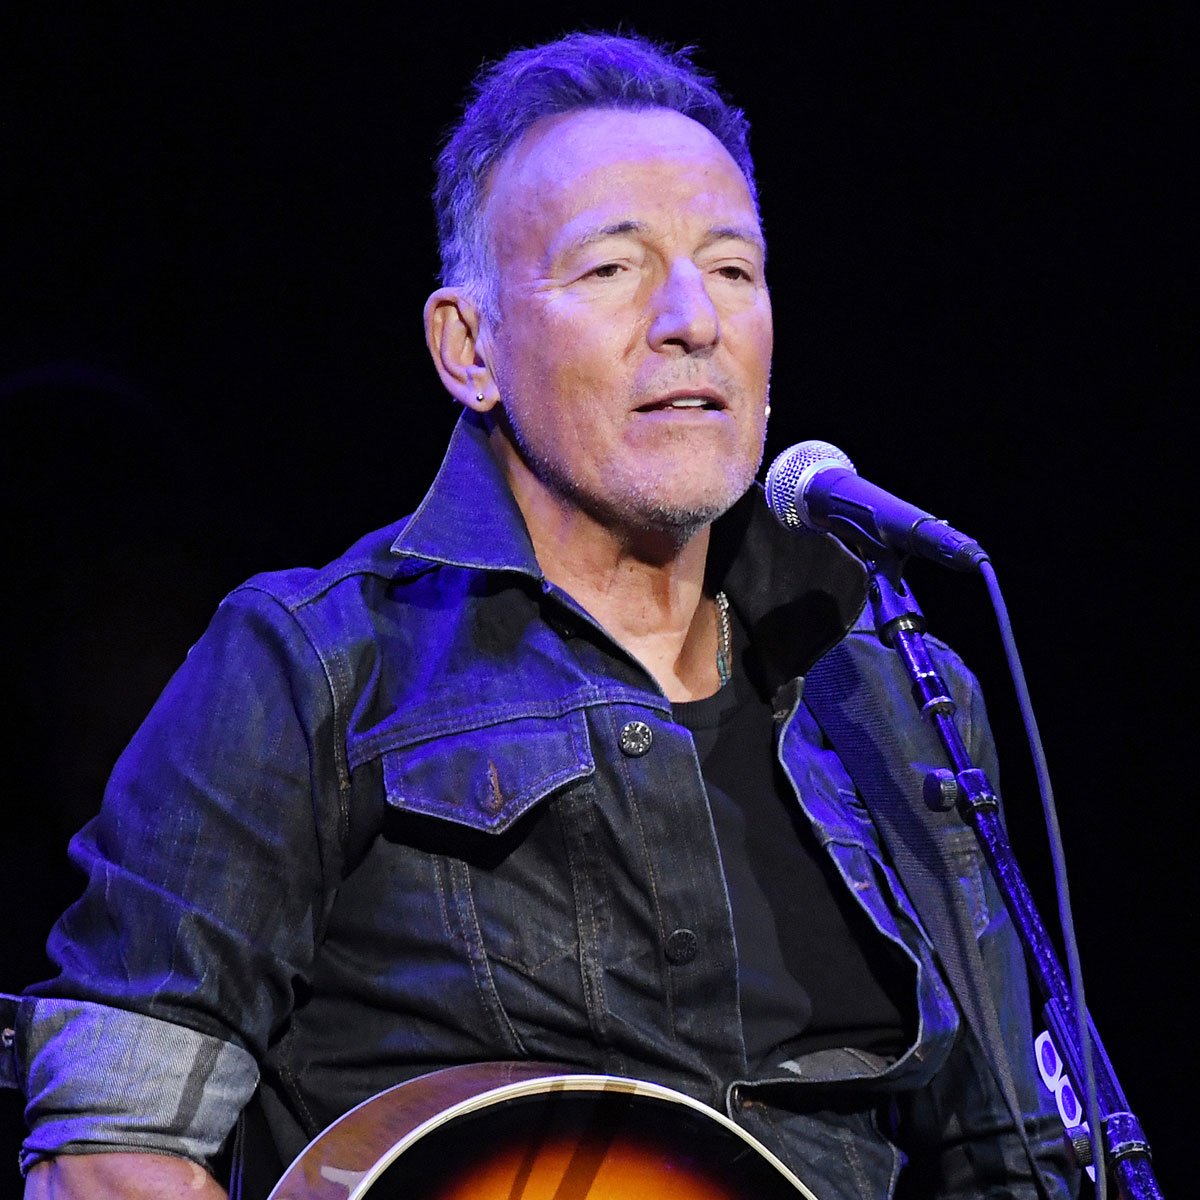 Bruce Springsteen Being Treated for Peptic Ulcer Disease